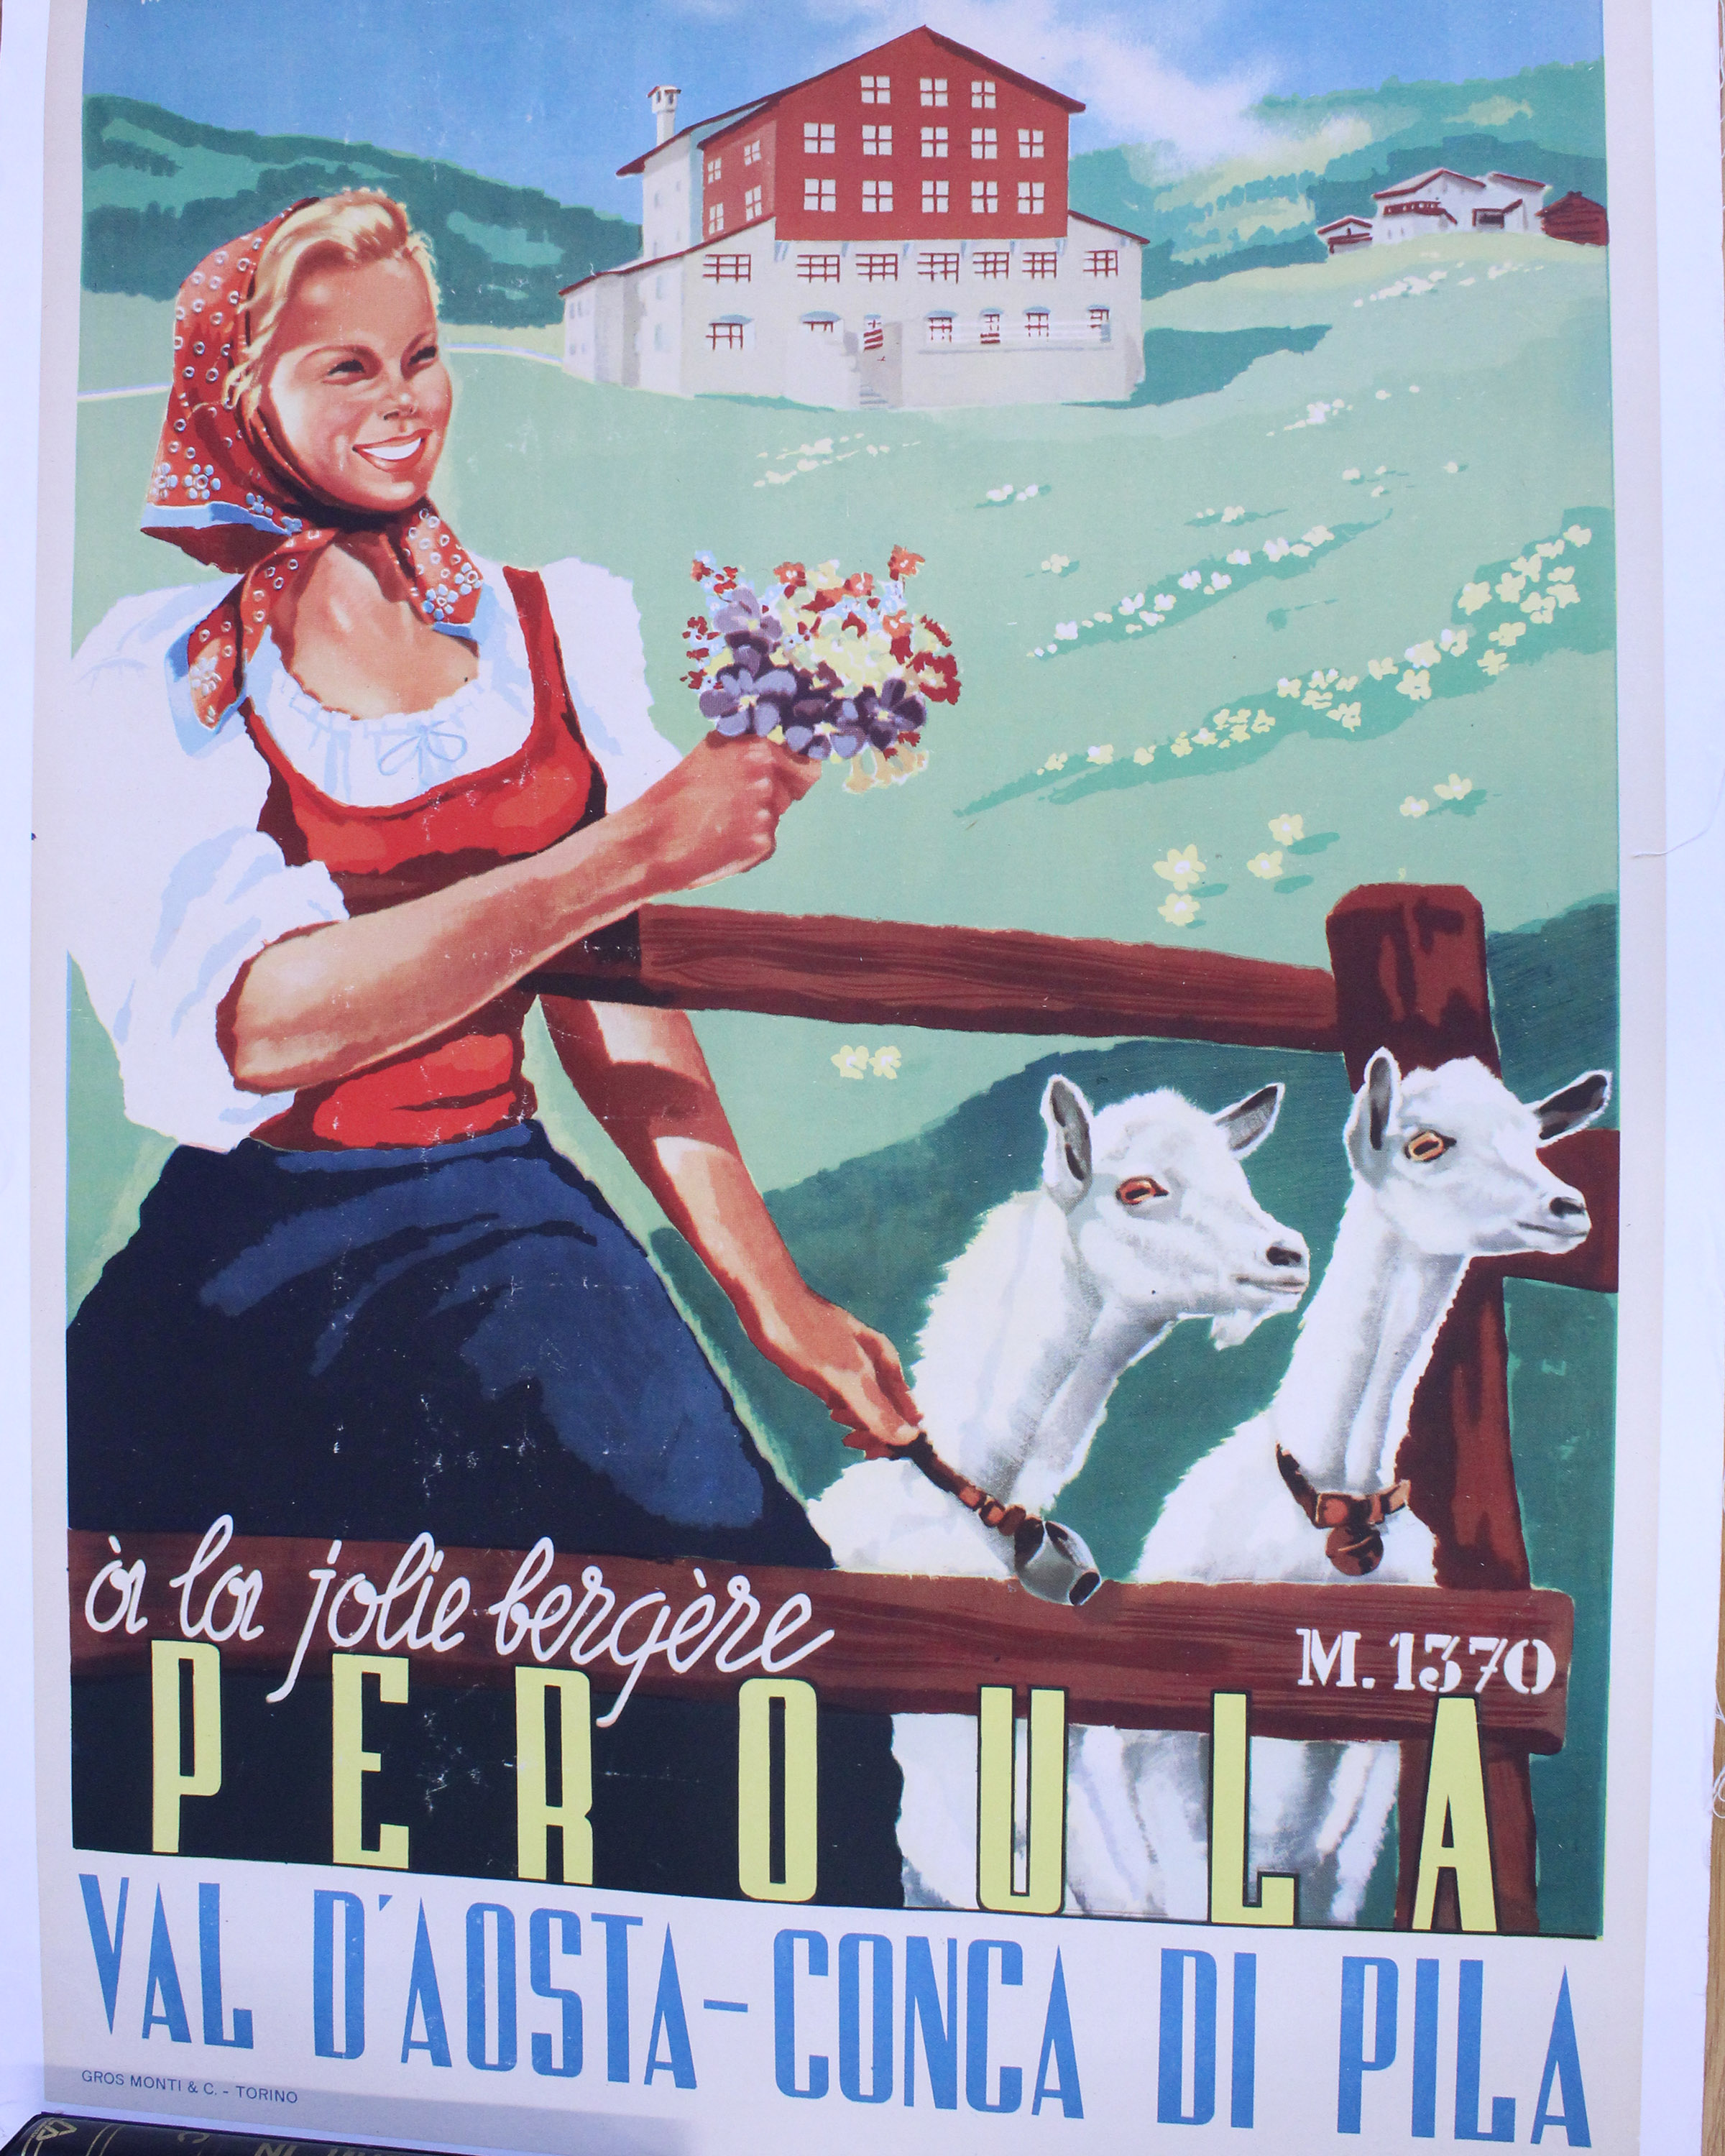 Five Posters From Across The World, Some VintagePeroula, print on paper on canvas, 1949Svejts, print - Image 2 of 2